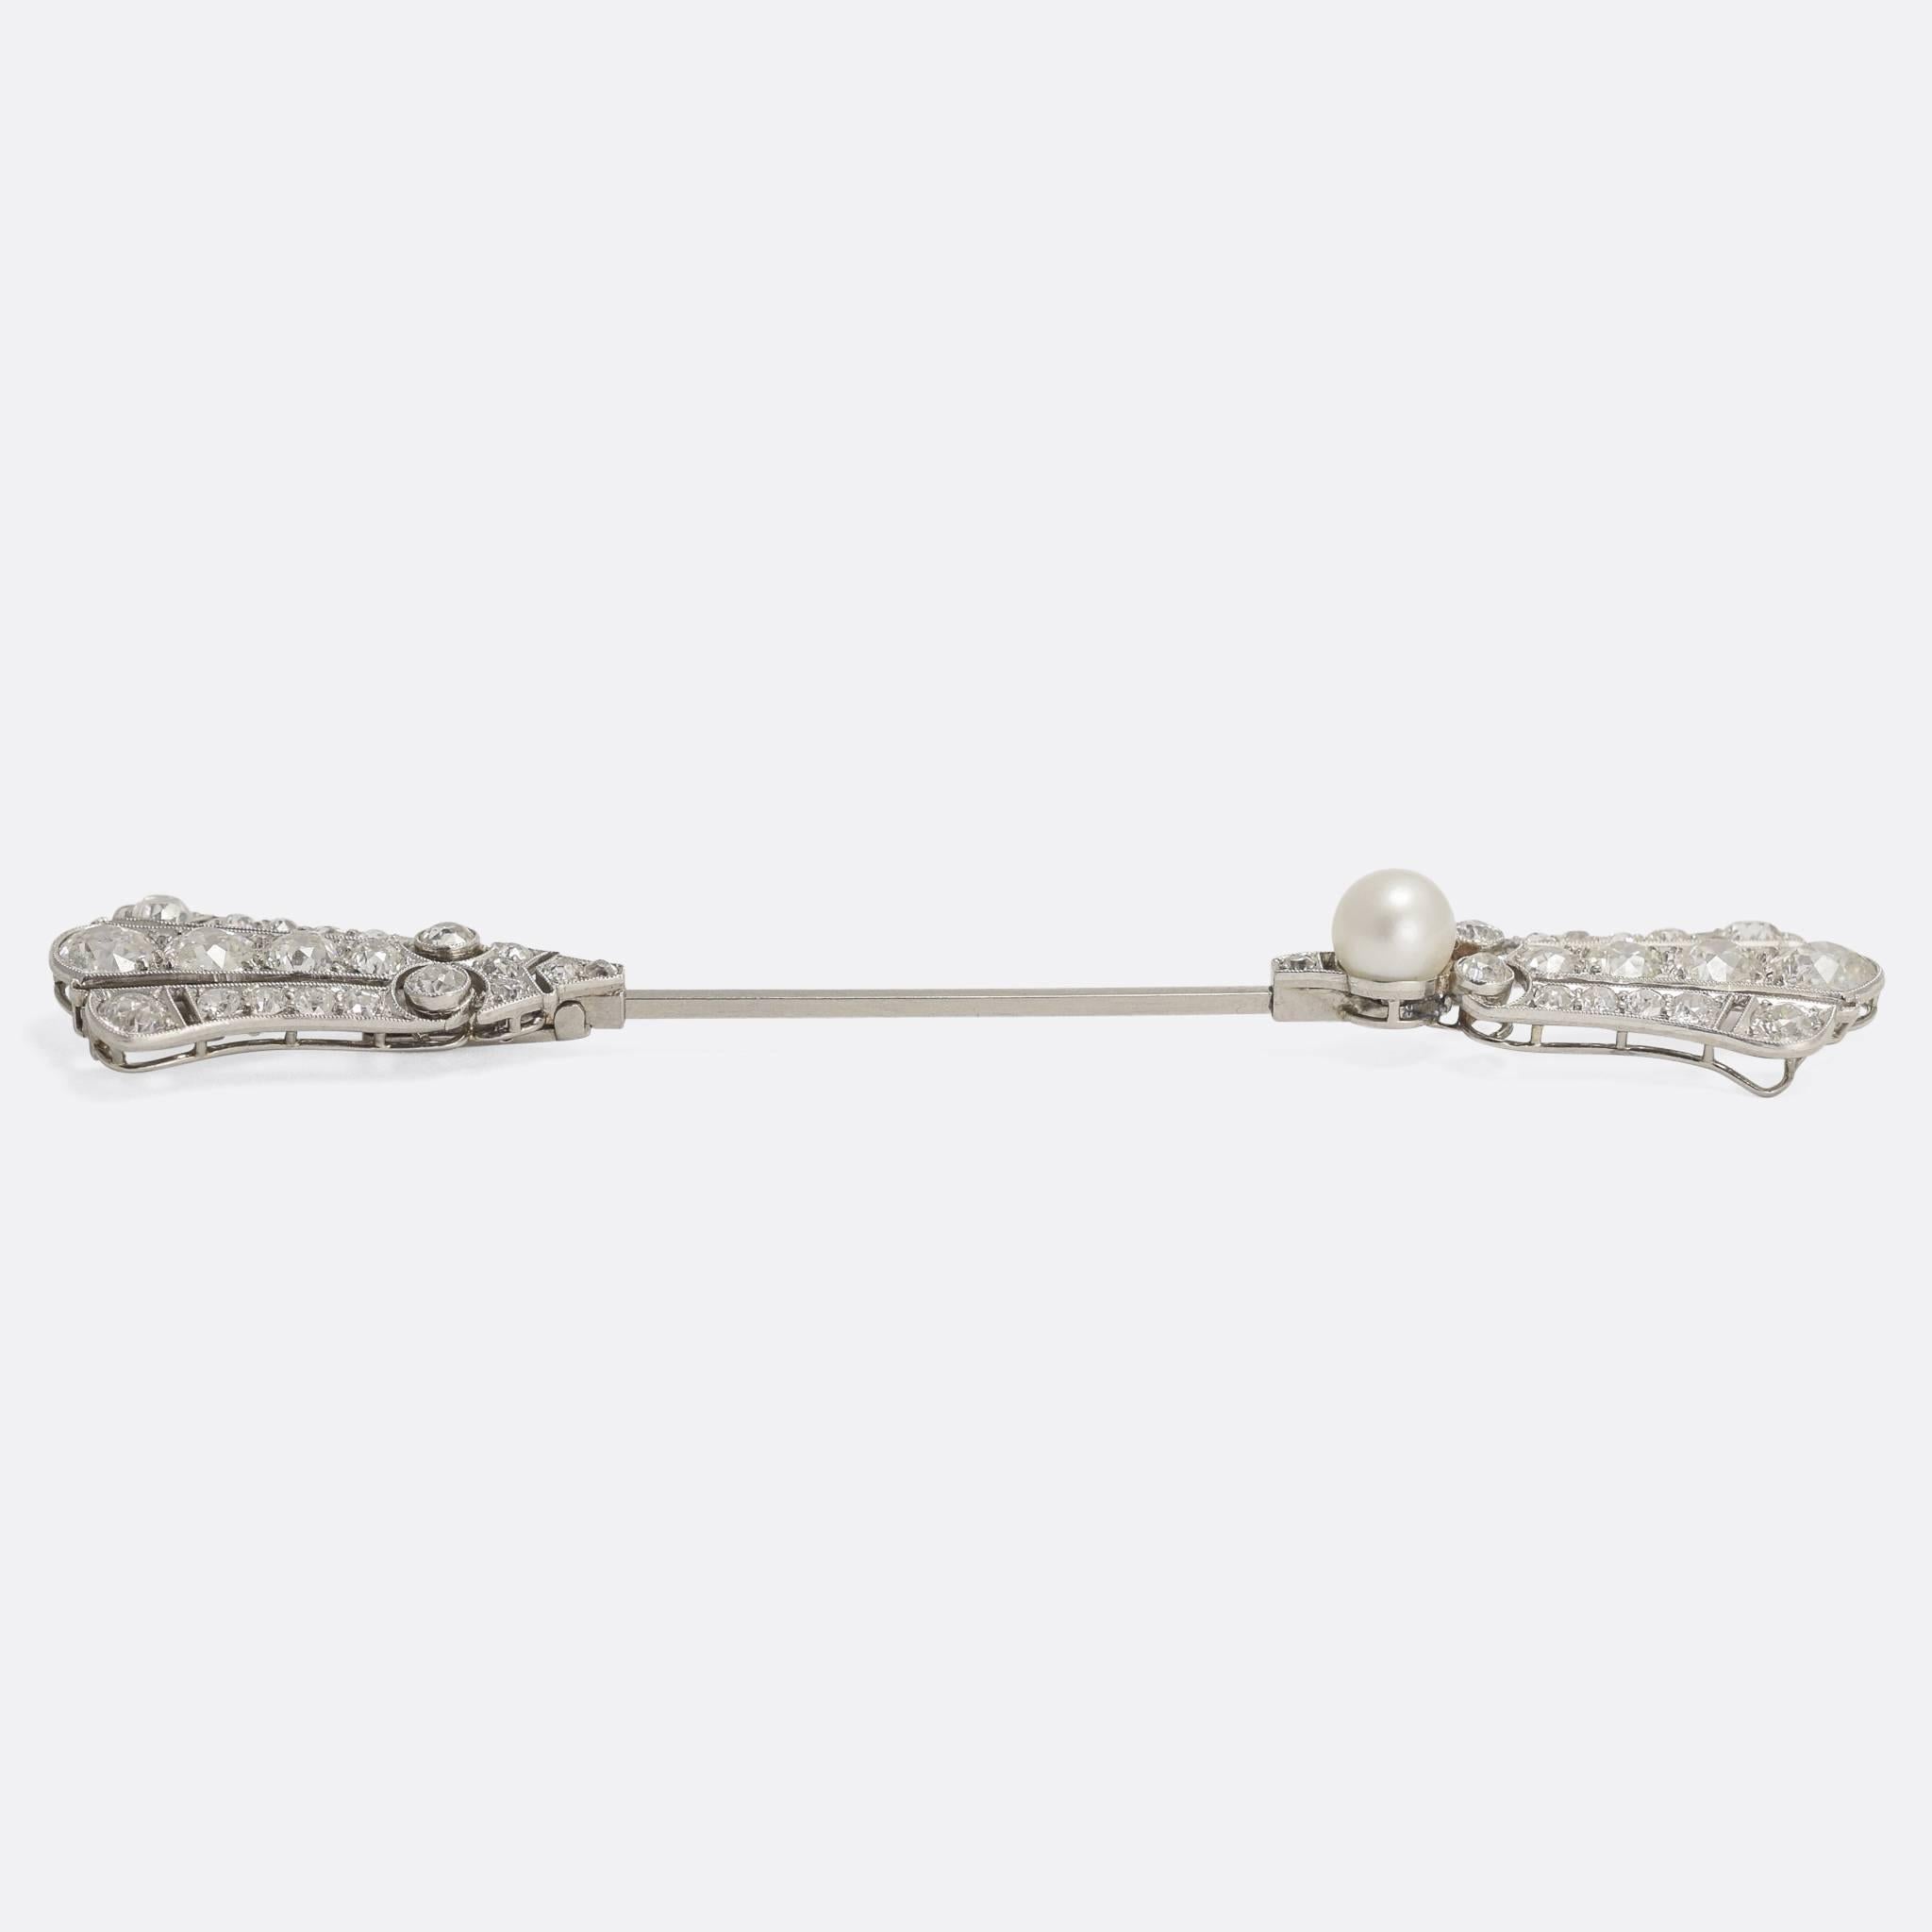 A stunning and extremely high quality French Jabot Pin modelled in Platinum & Gold, set with 4 carats of sparkling transitional cut diamonds and a natural pearl. This particular piece has a very unusual locking mechanism that I have never come